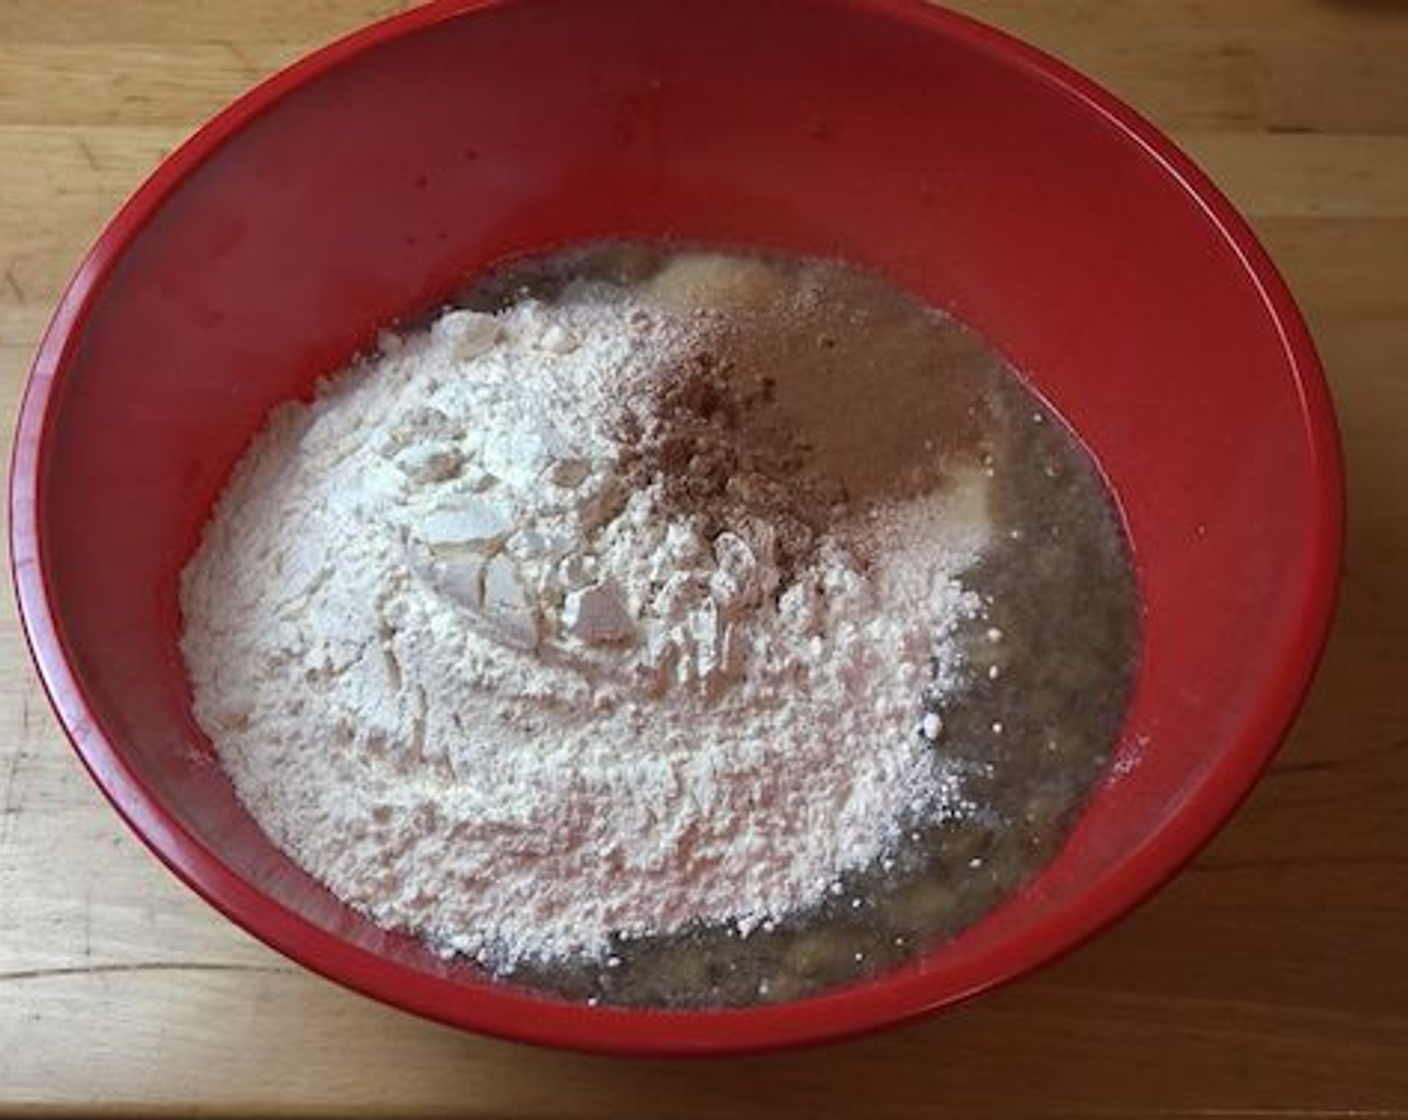 step 3 Next, add in La Lechera® Sweetened Condensed Milk (1 can), Self-Rising Flour (2 1/2 cups) and Ground Cinnamon (1 tsp). Give all the ingredients a good mix until just combined.